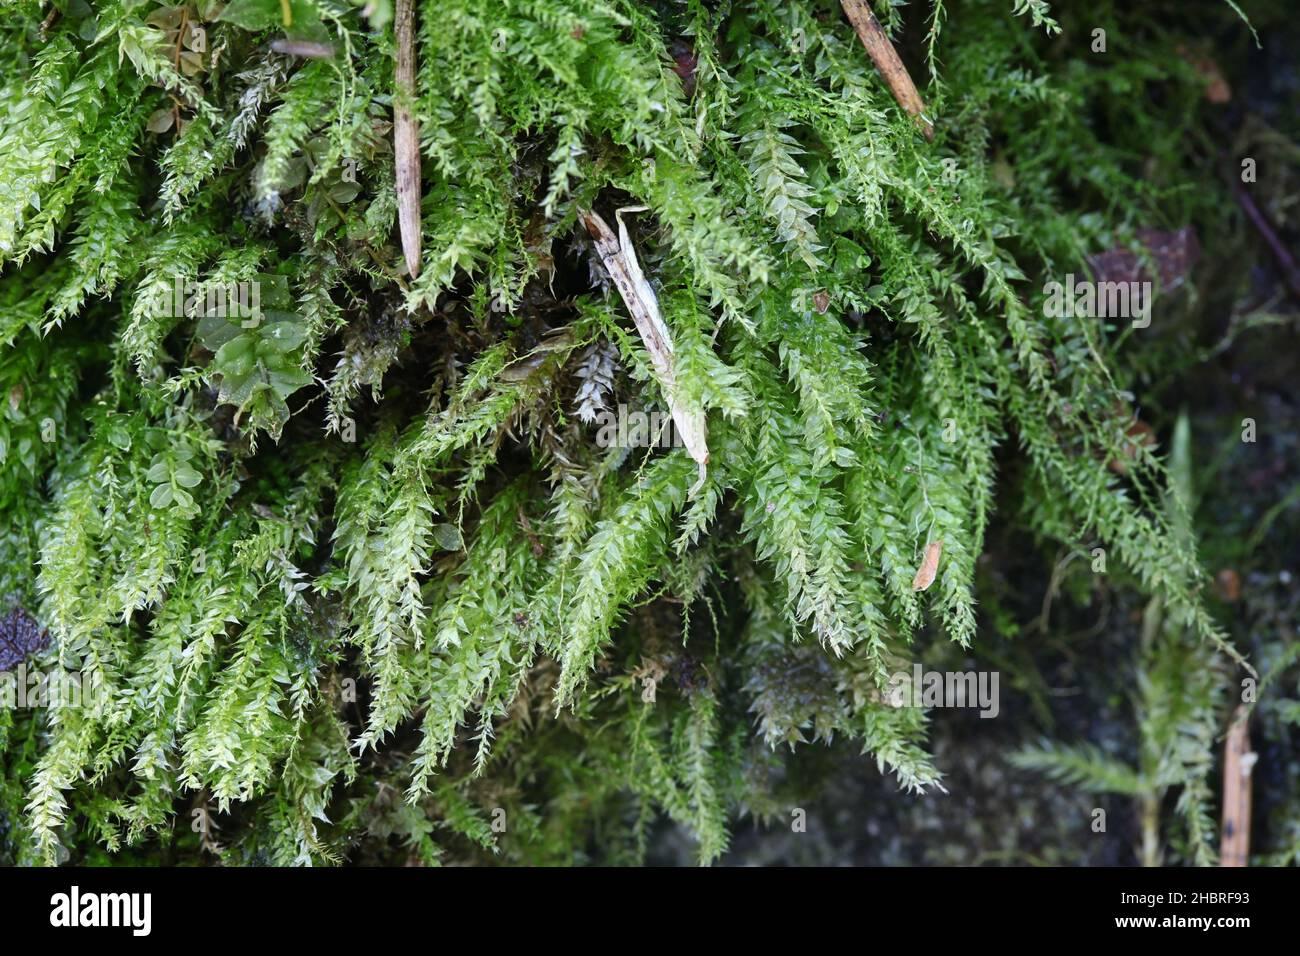 plagiothecium-denticulatum-known-as-dented-silk-moss-or-toothed-plagiothecium-moss-2HBRF93.jpg